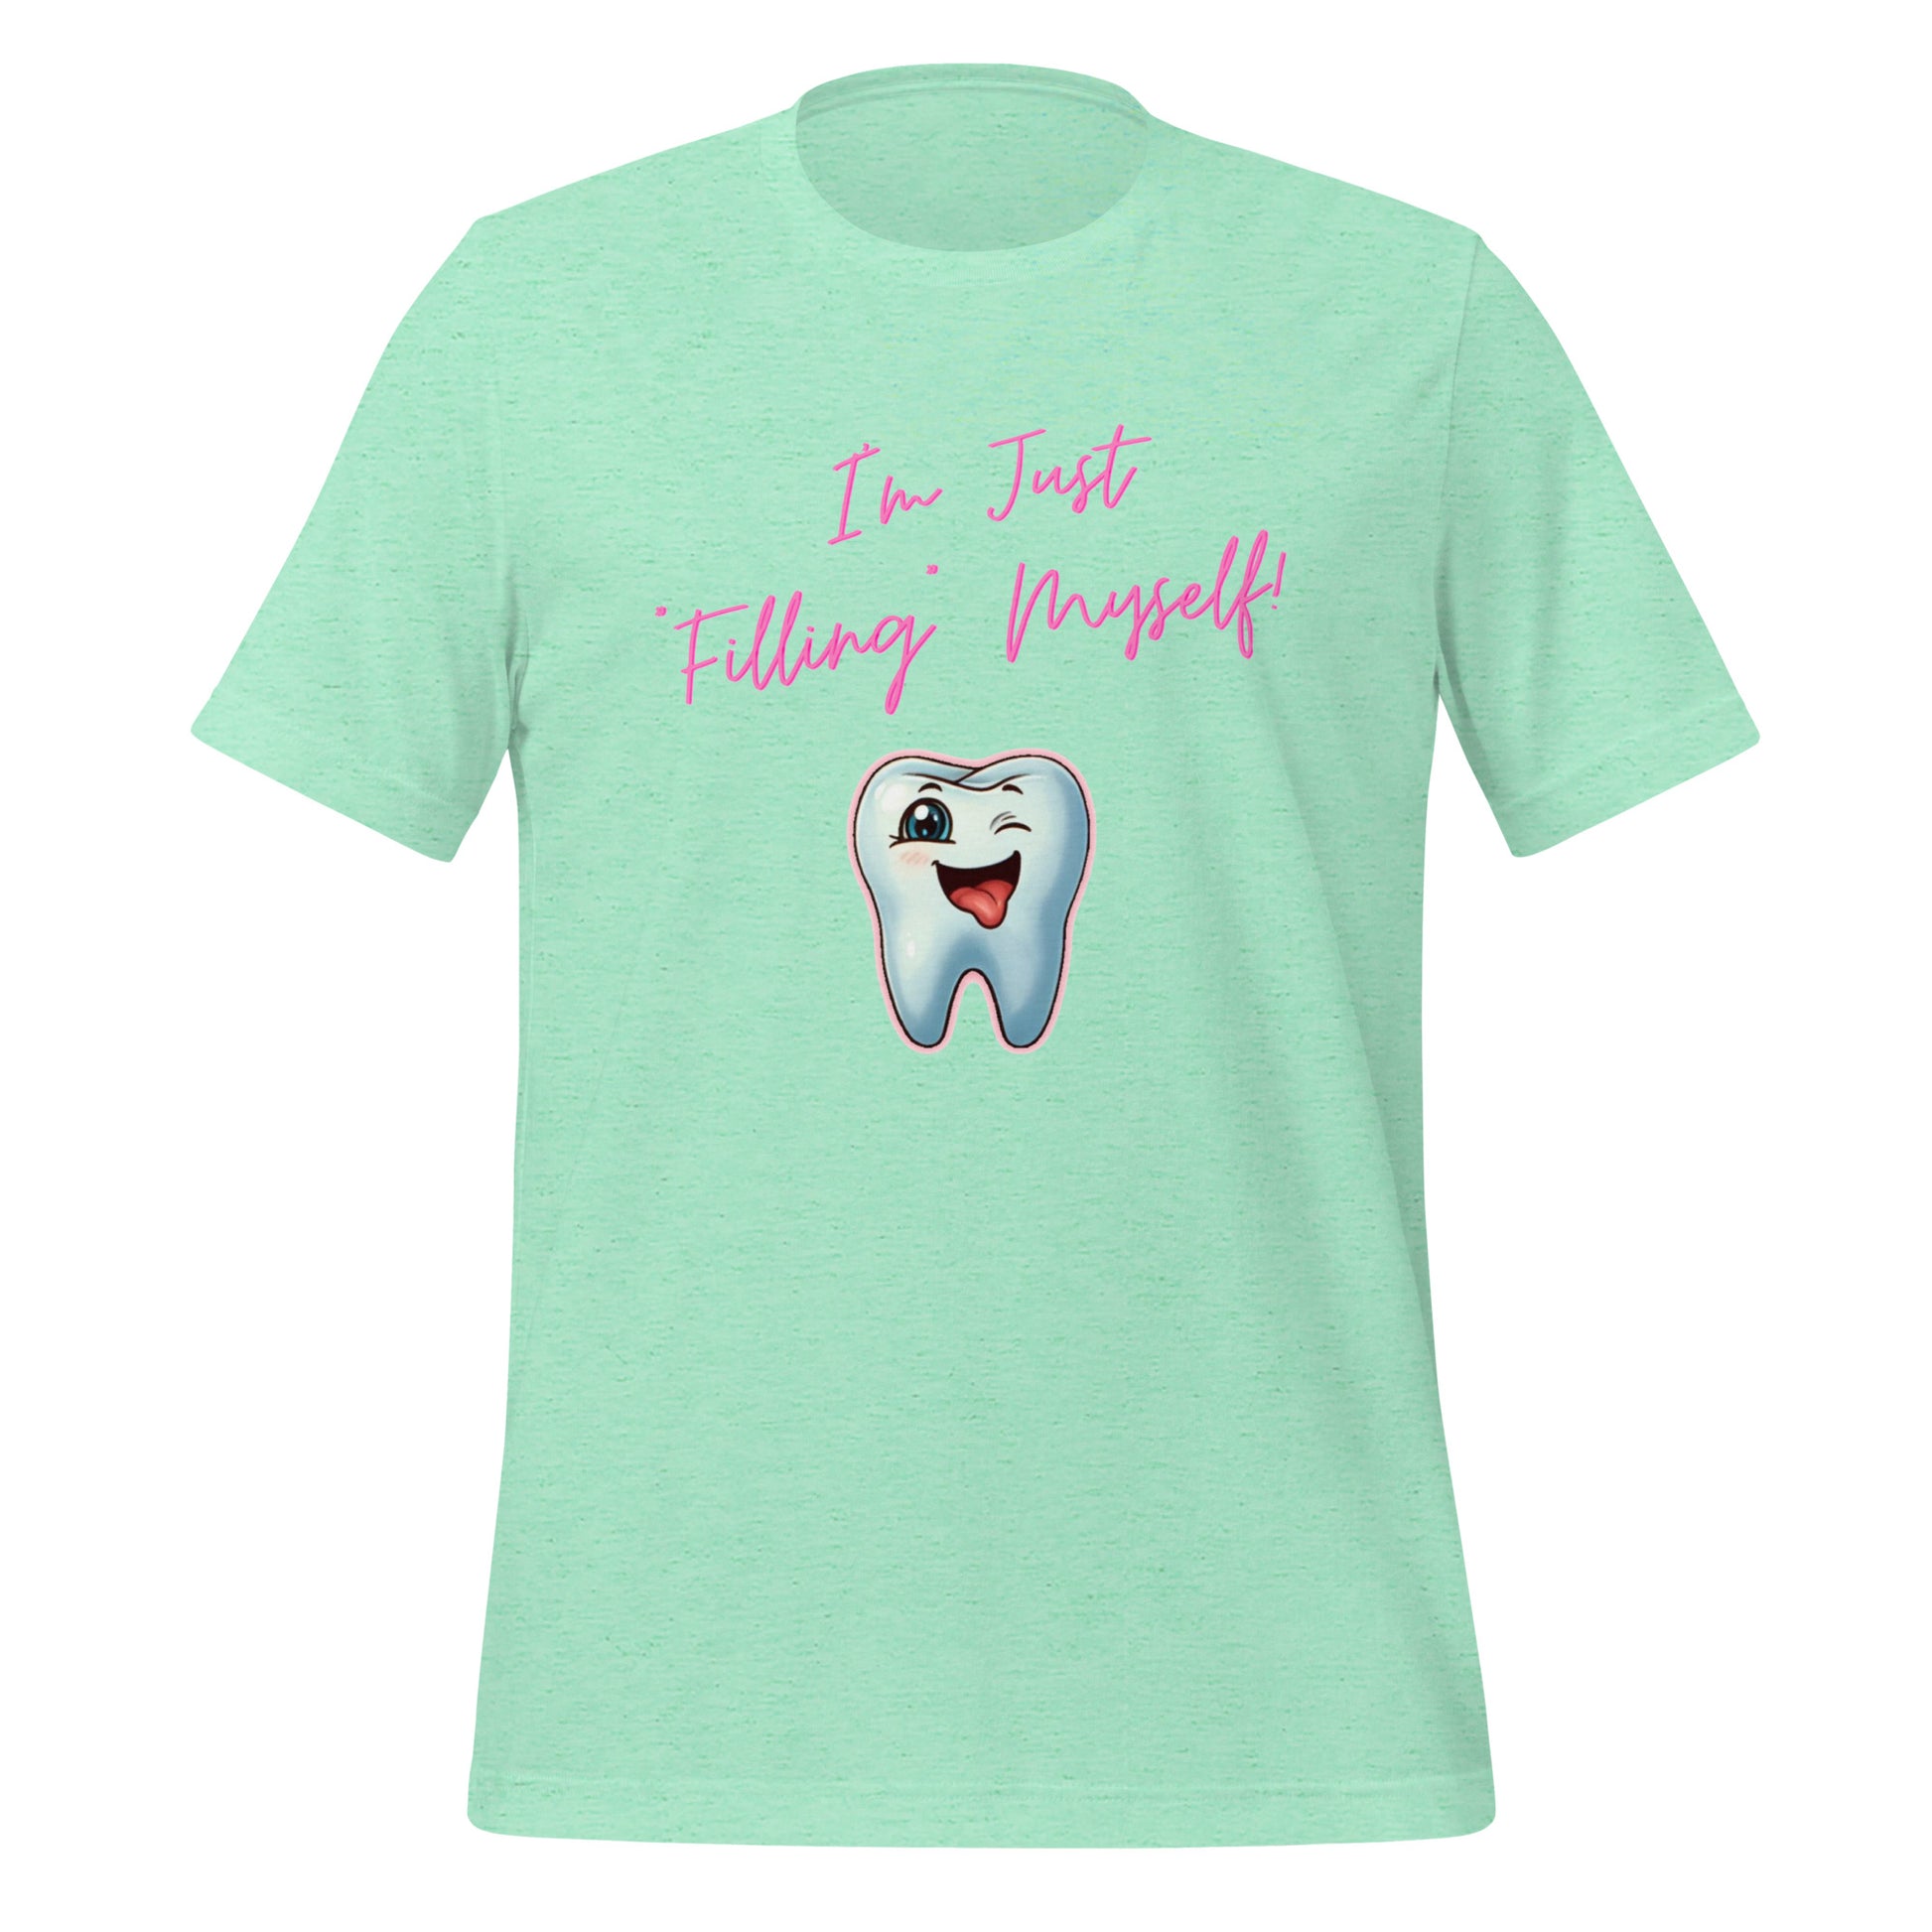 Flirtatious winking cartoon tooth character with the phrase "I'm just filling myself!" Ideal for a funny dental t-shirt or a cute dental assistant shirt. Heather mint color. 